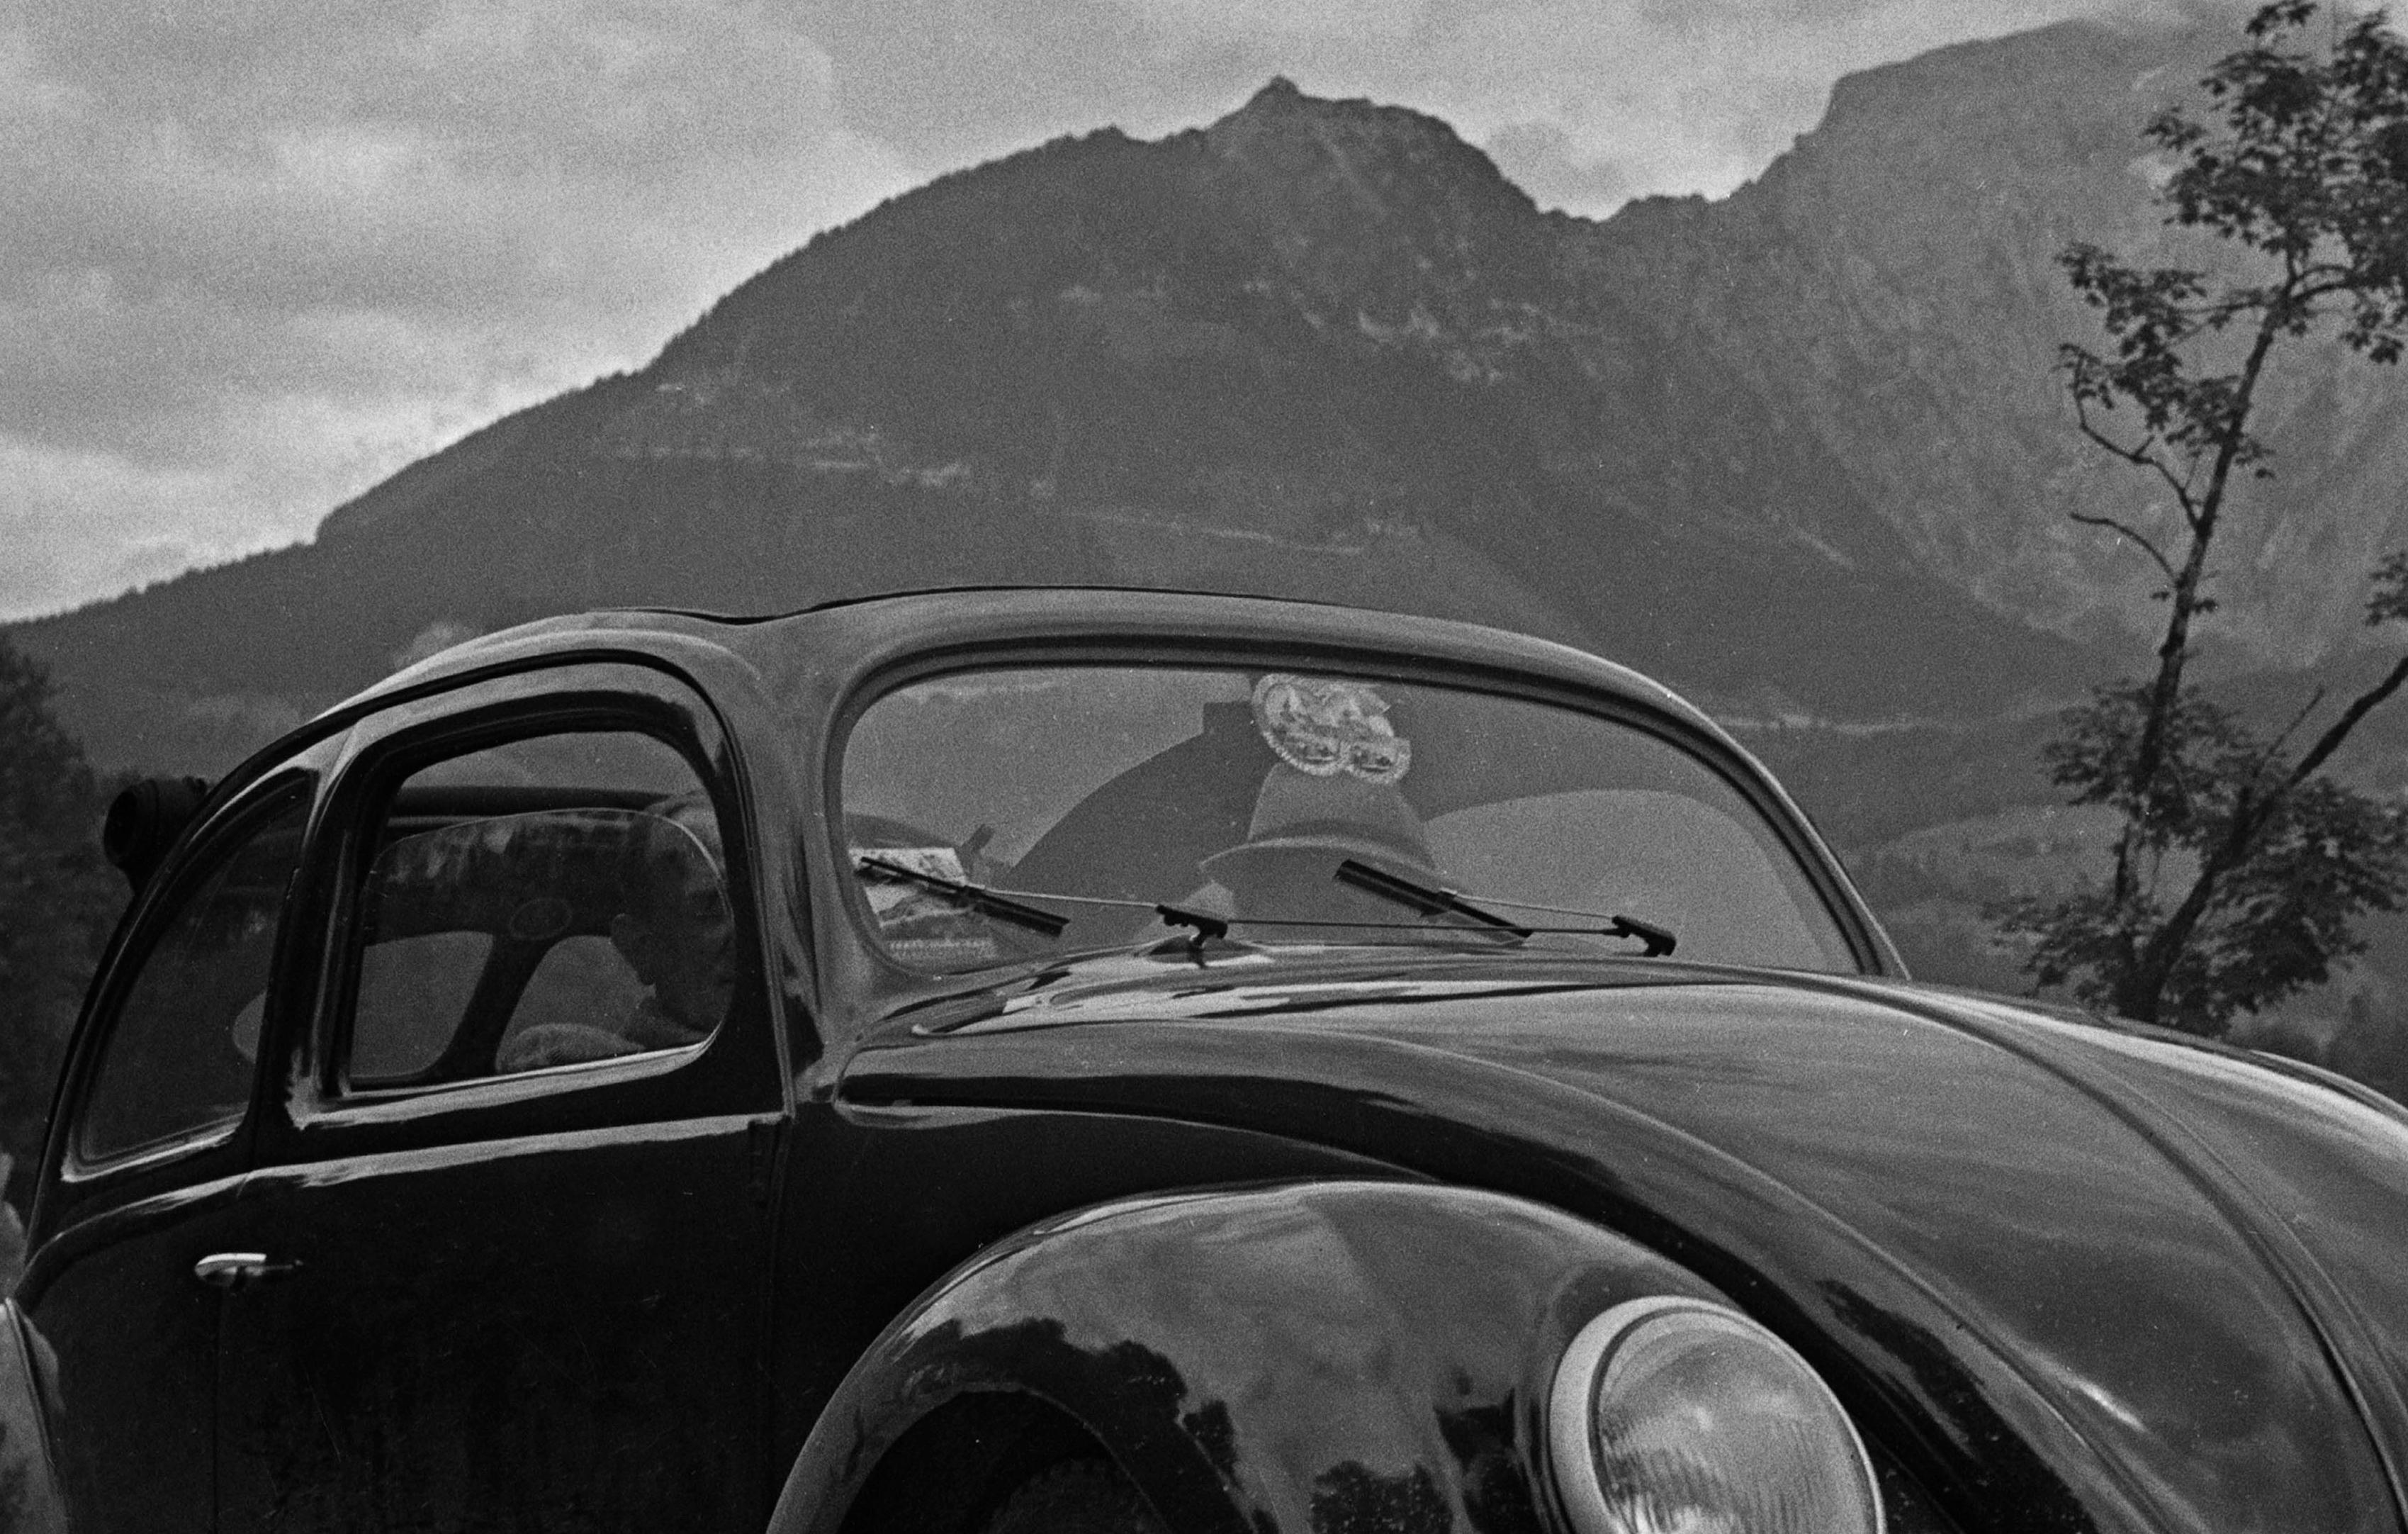 Volkswagen beetle parking close to mountains, Germany 1939 Printed Later  - Photograph by Karl Heinrich Lämmel